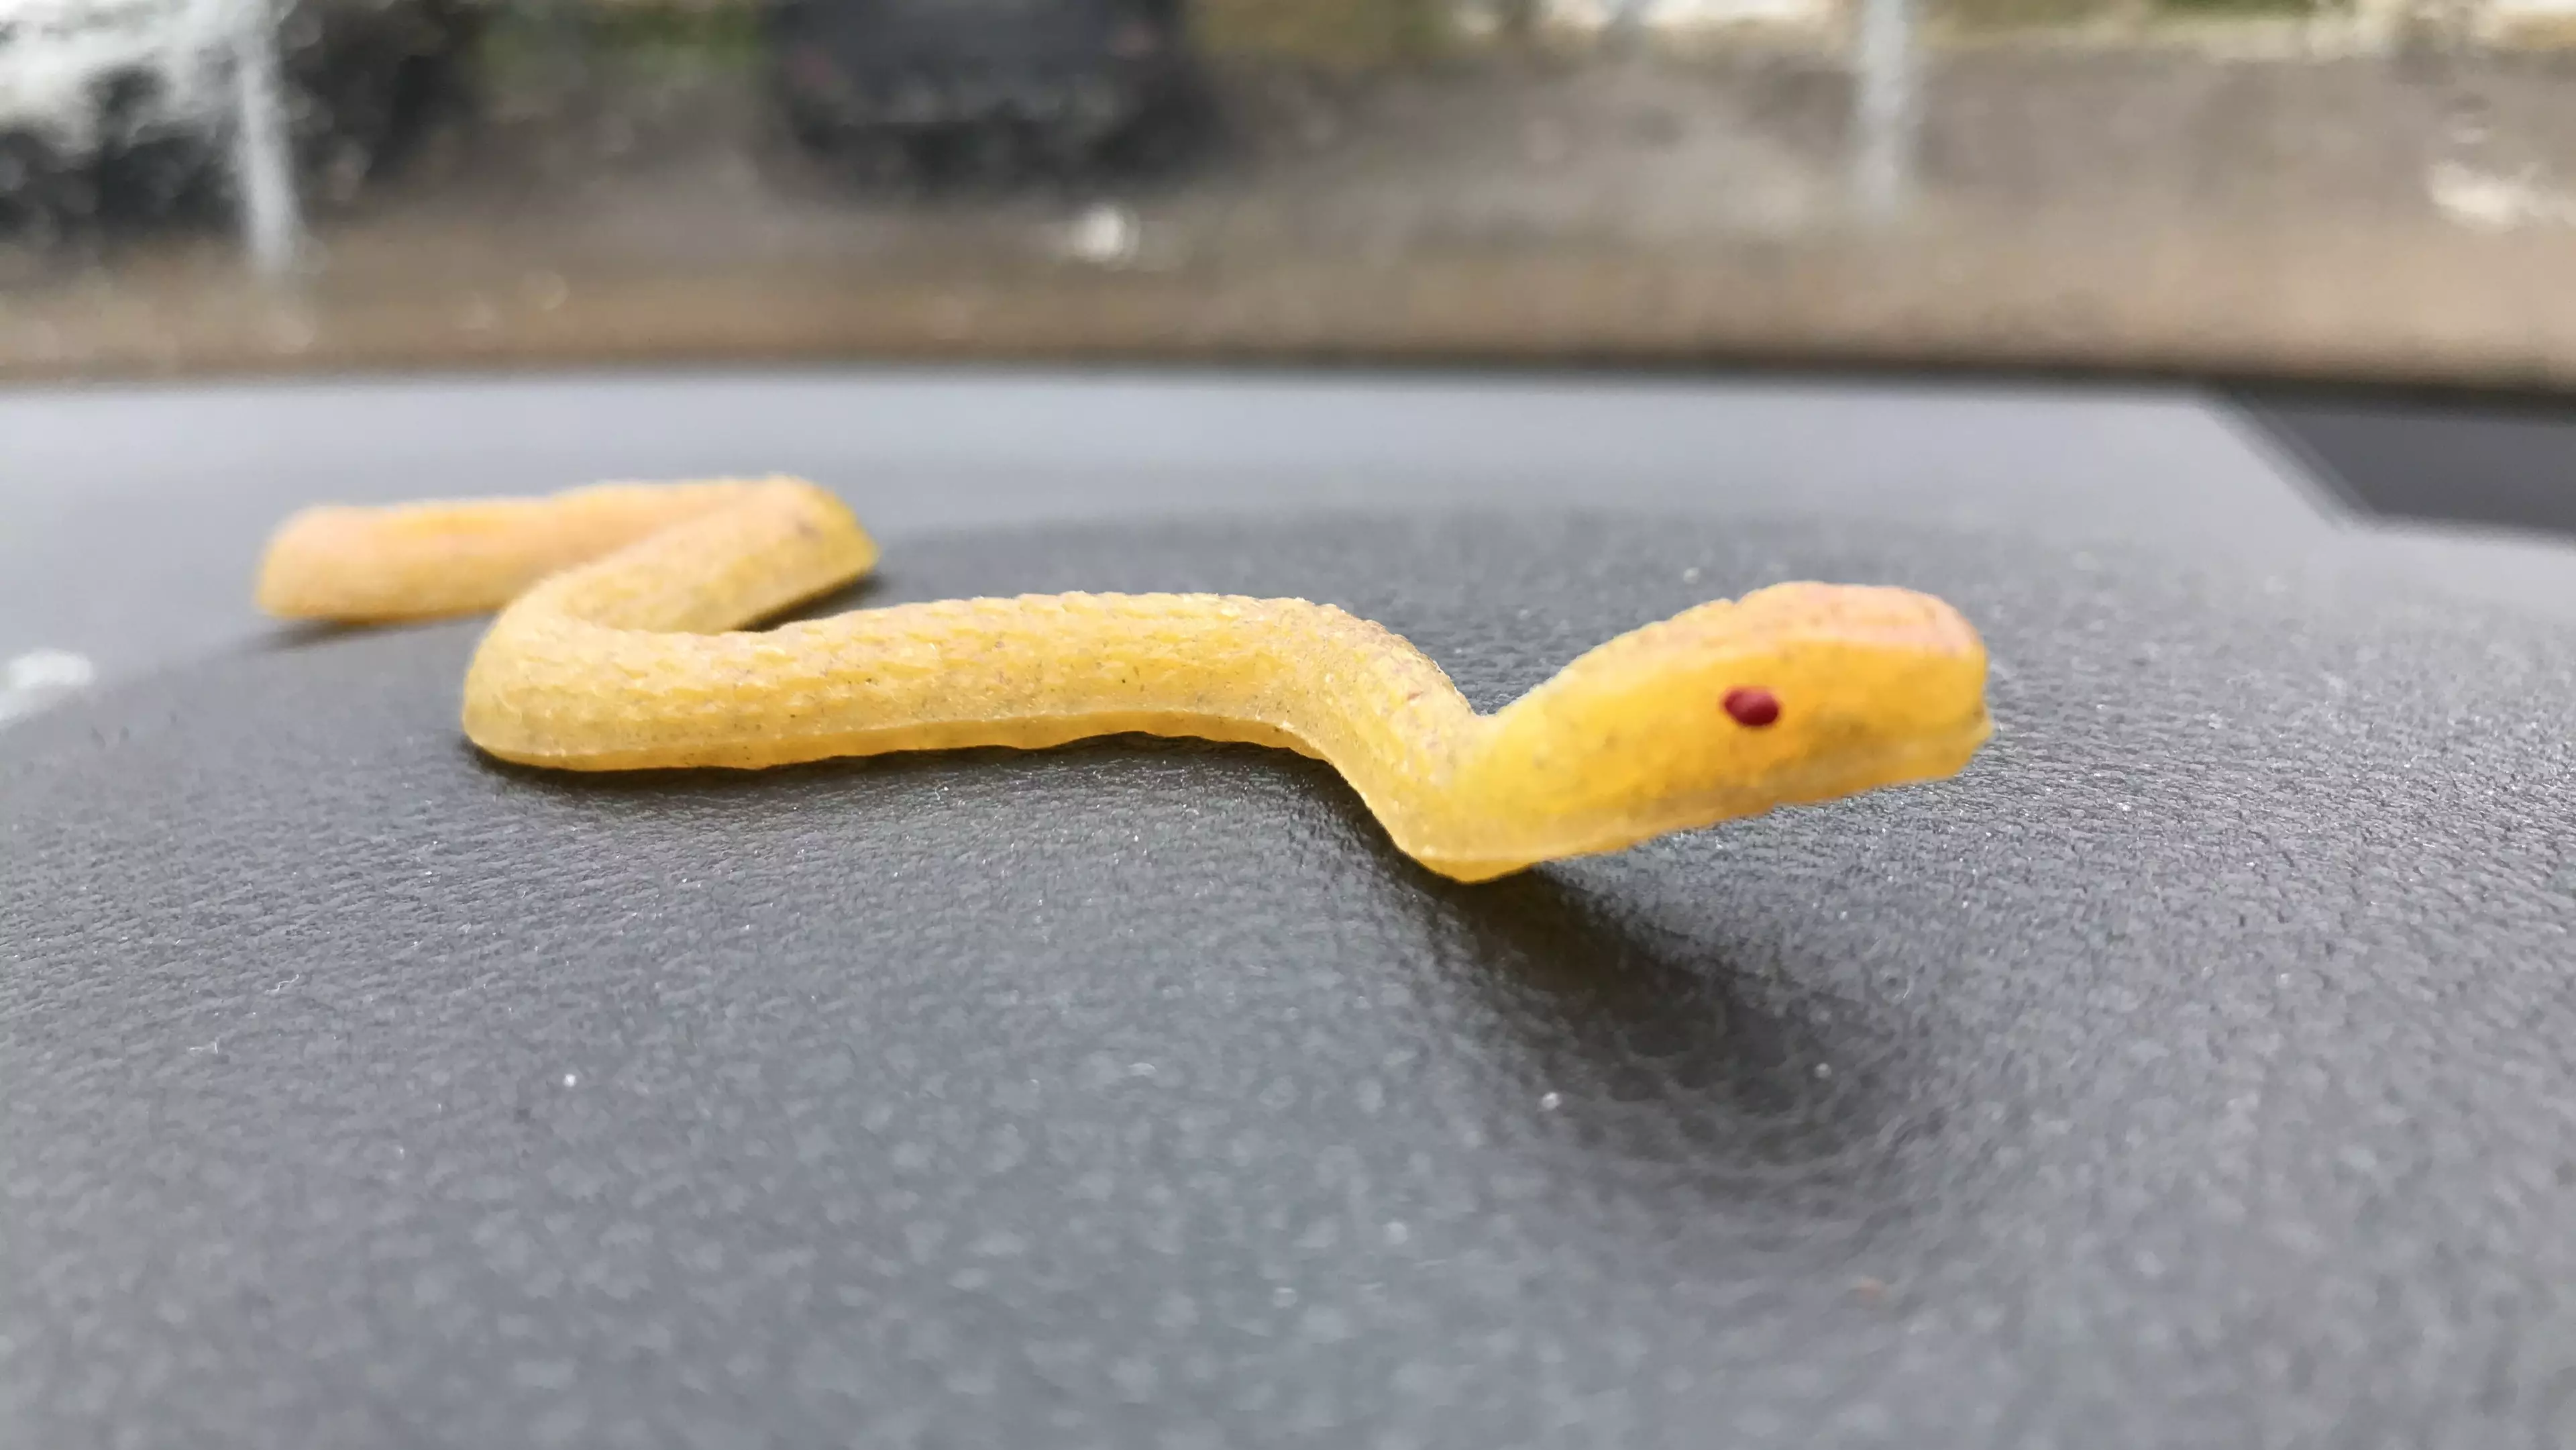 Woman Trapped In Her Flat By 'Snake' That Turned Out To Be A Toy